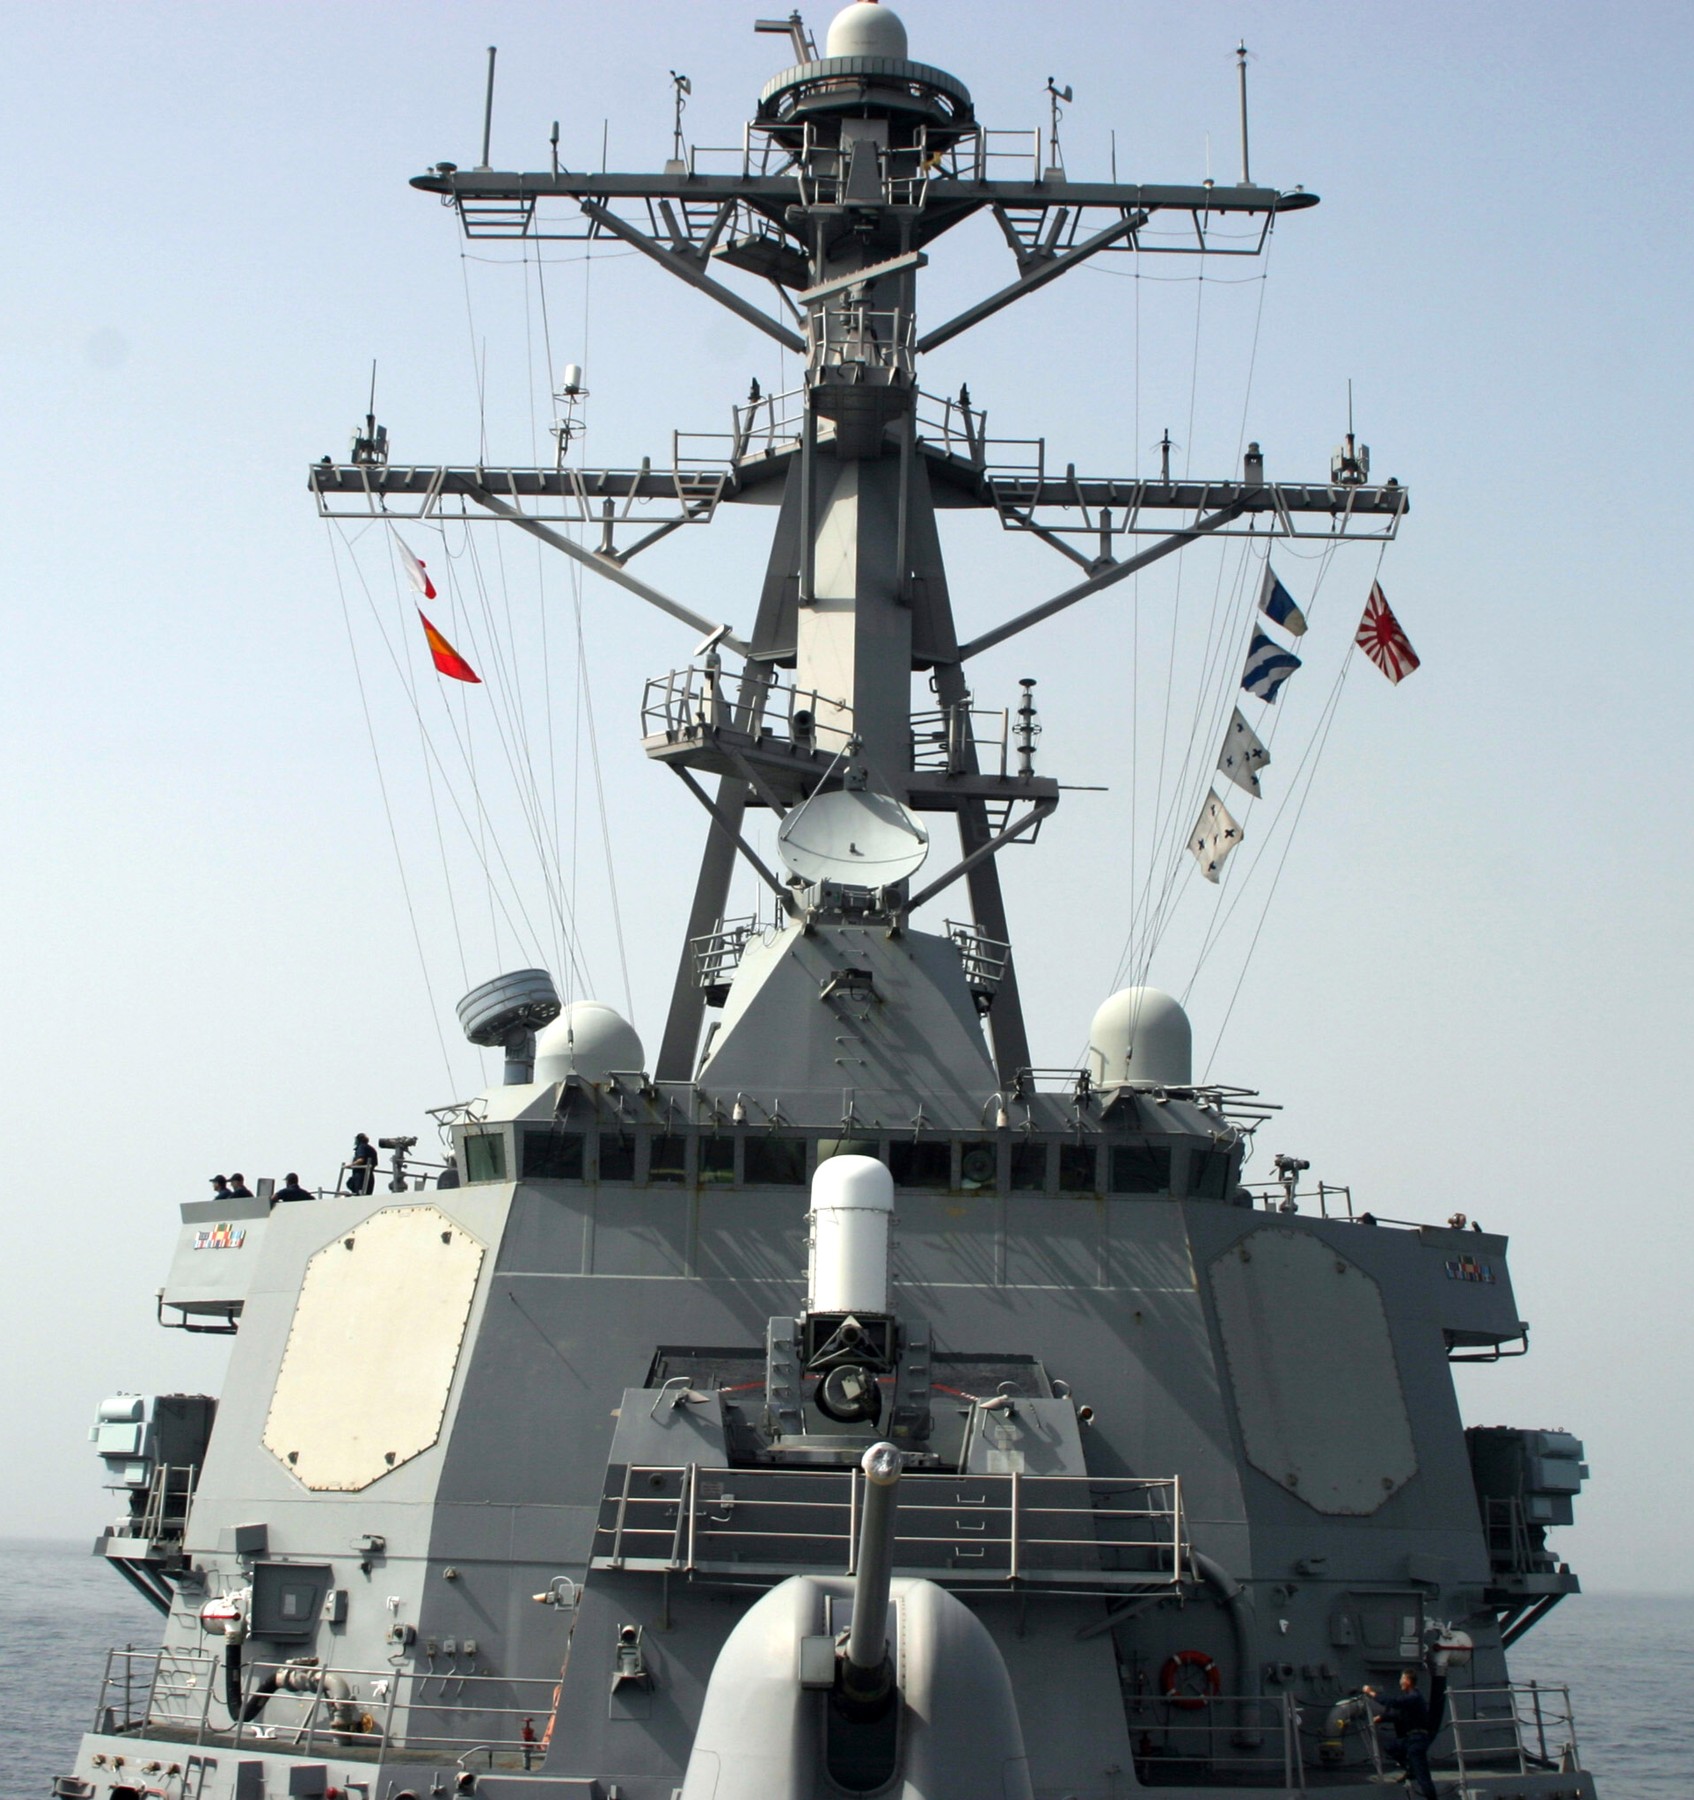 ddg-73 uss decatur guided missile destroyer arleigh burke class aegis bmd 39